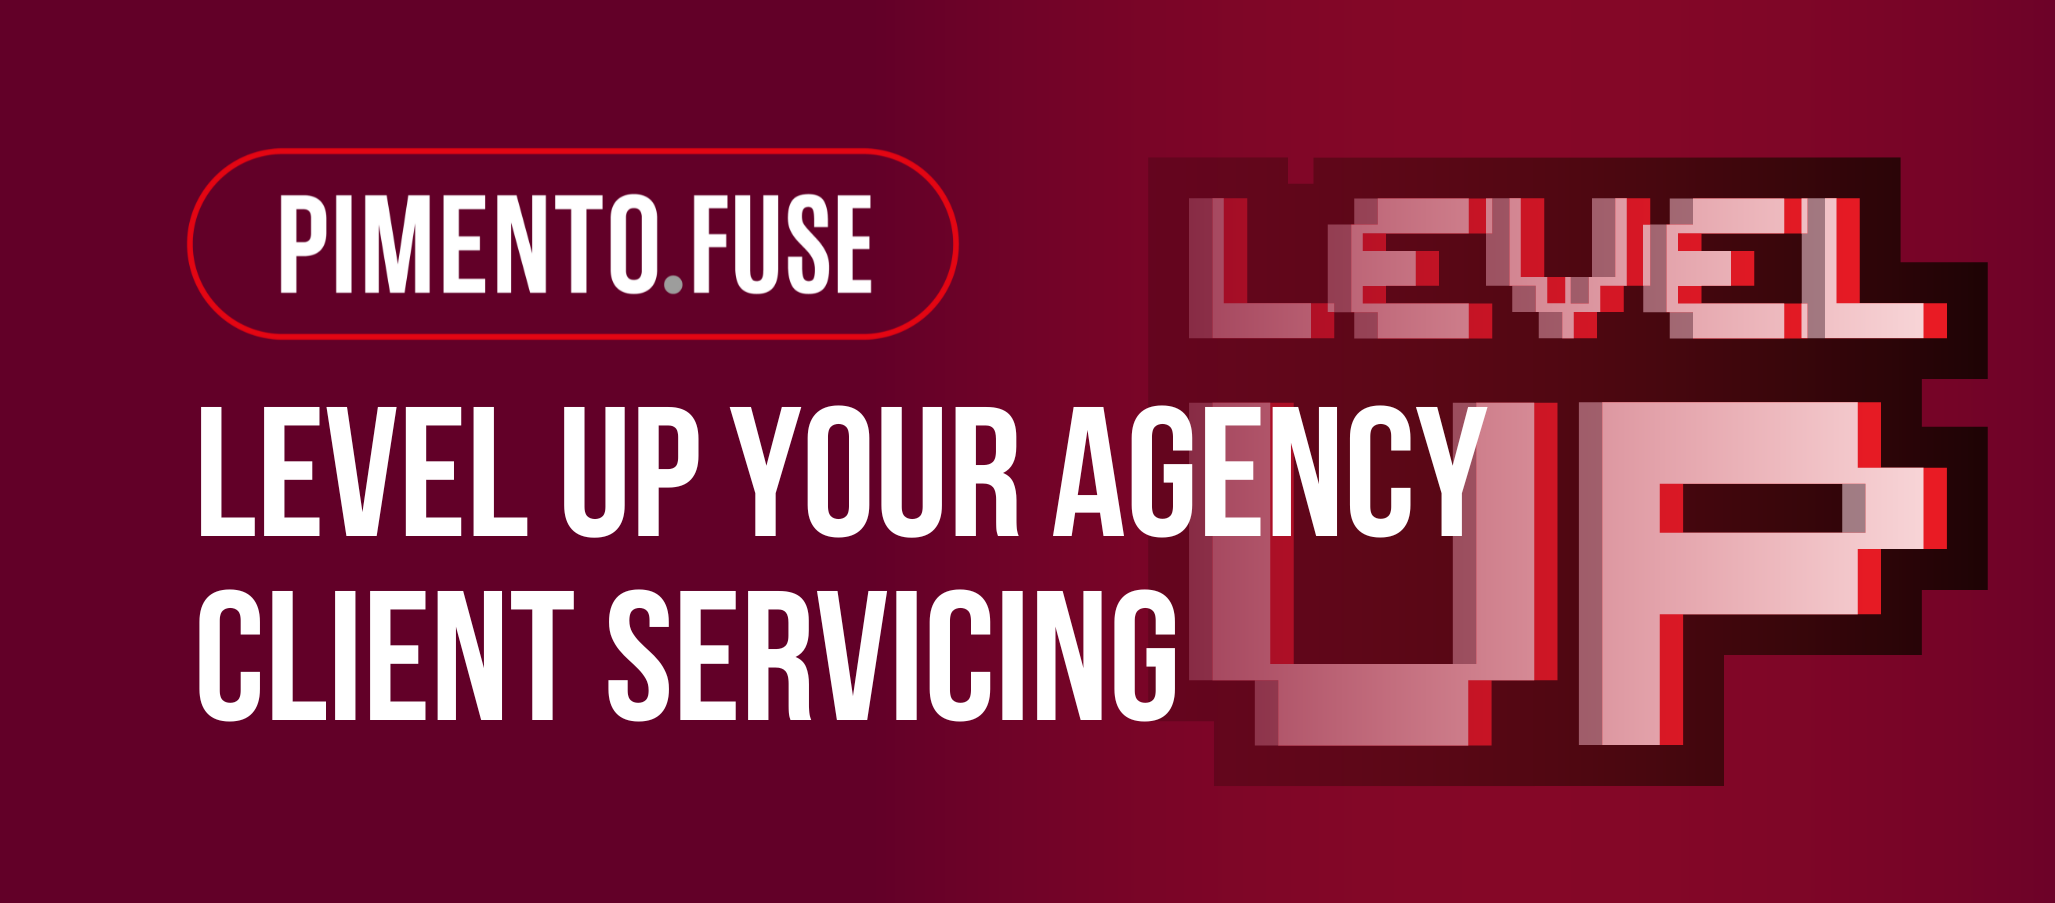 Level Up your Agency Client Servicing to Drive Growth From Existing Clients